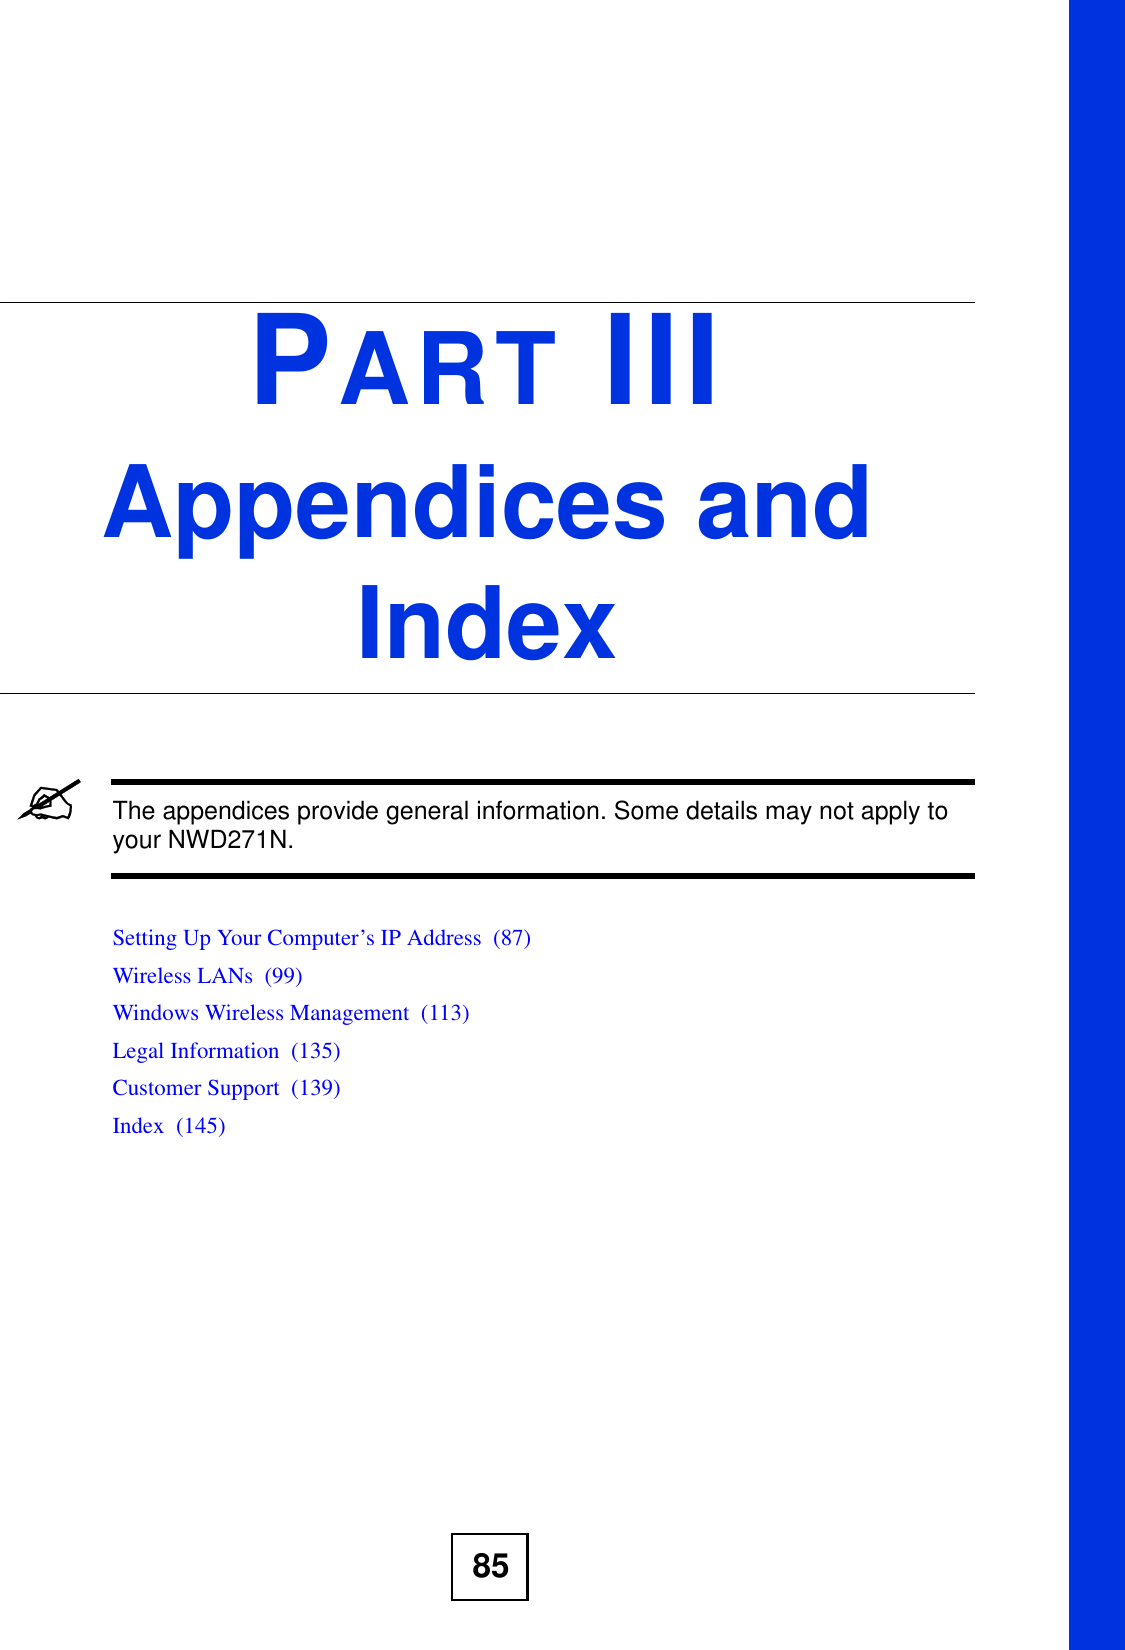 85PART IIIAppendices and Index&quot;The appendices provide general information. Some details may not apply to your NWD271N.Setting Up Your Computer’s IP Address  (87)Wireless LANs  (99)Windows Wireless Management  (113)Legal Information  (135)Customer Support  (139)Index  (145)